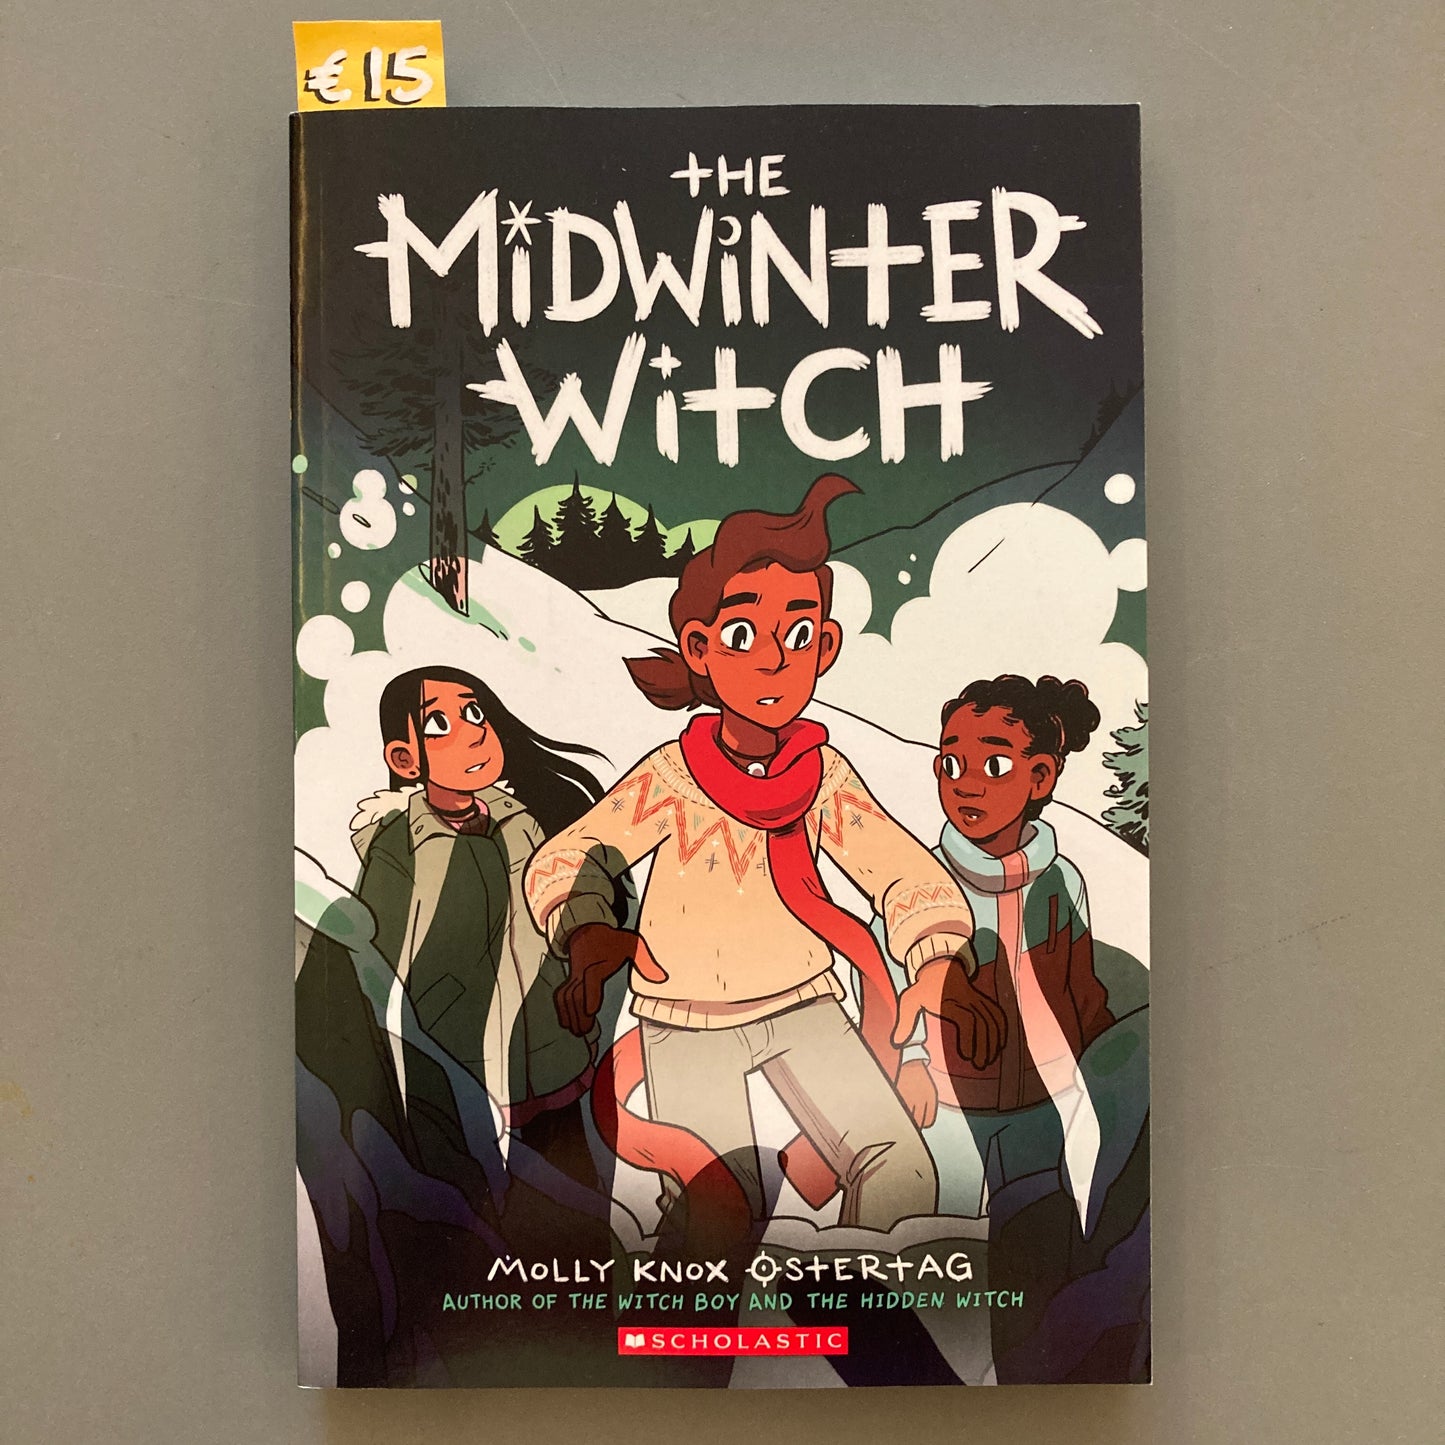 The Midwinter Witch